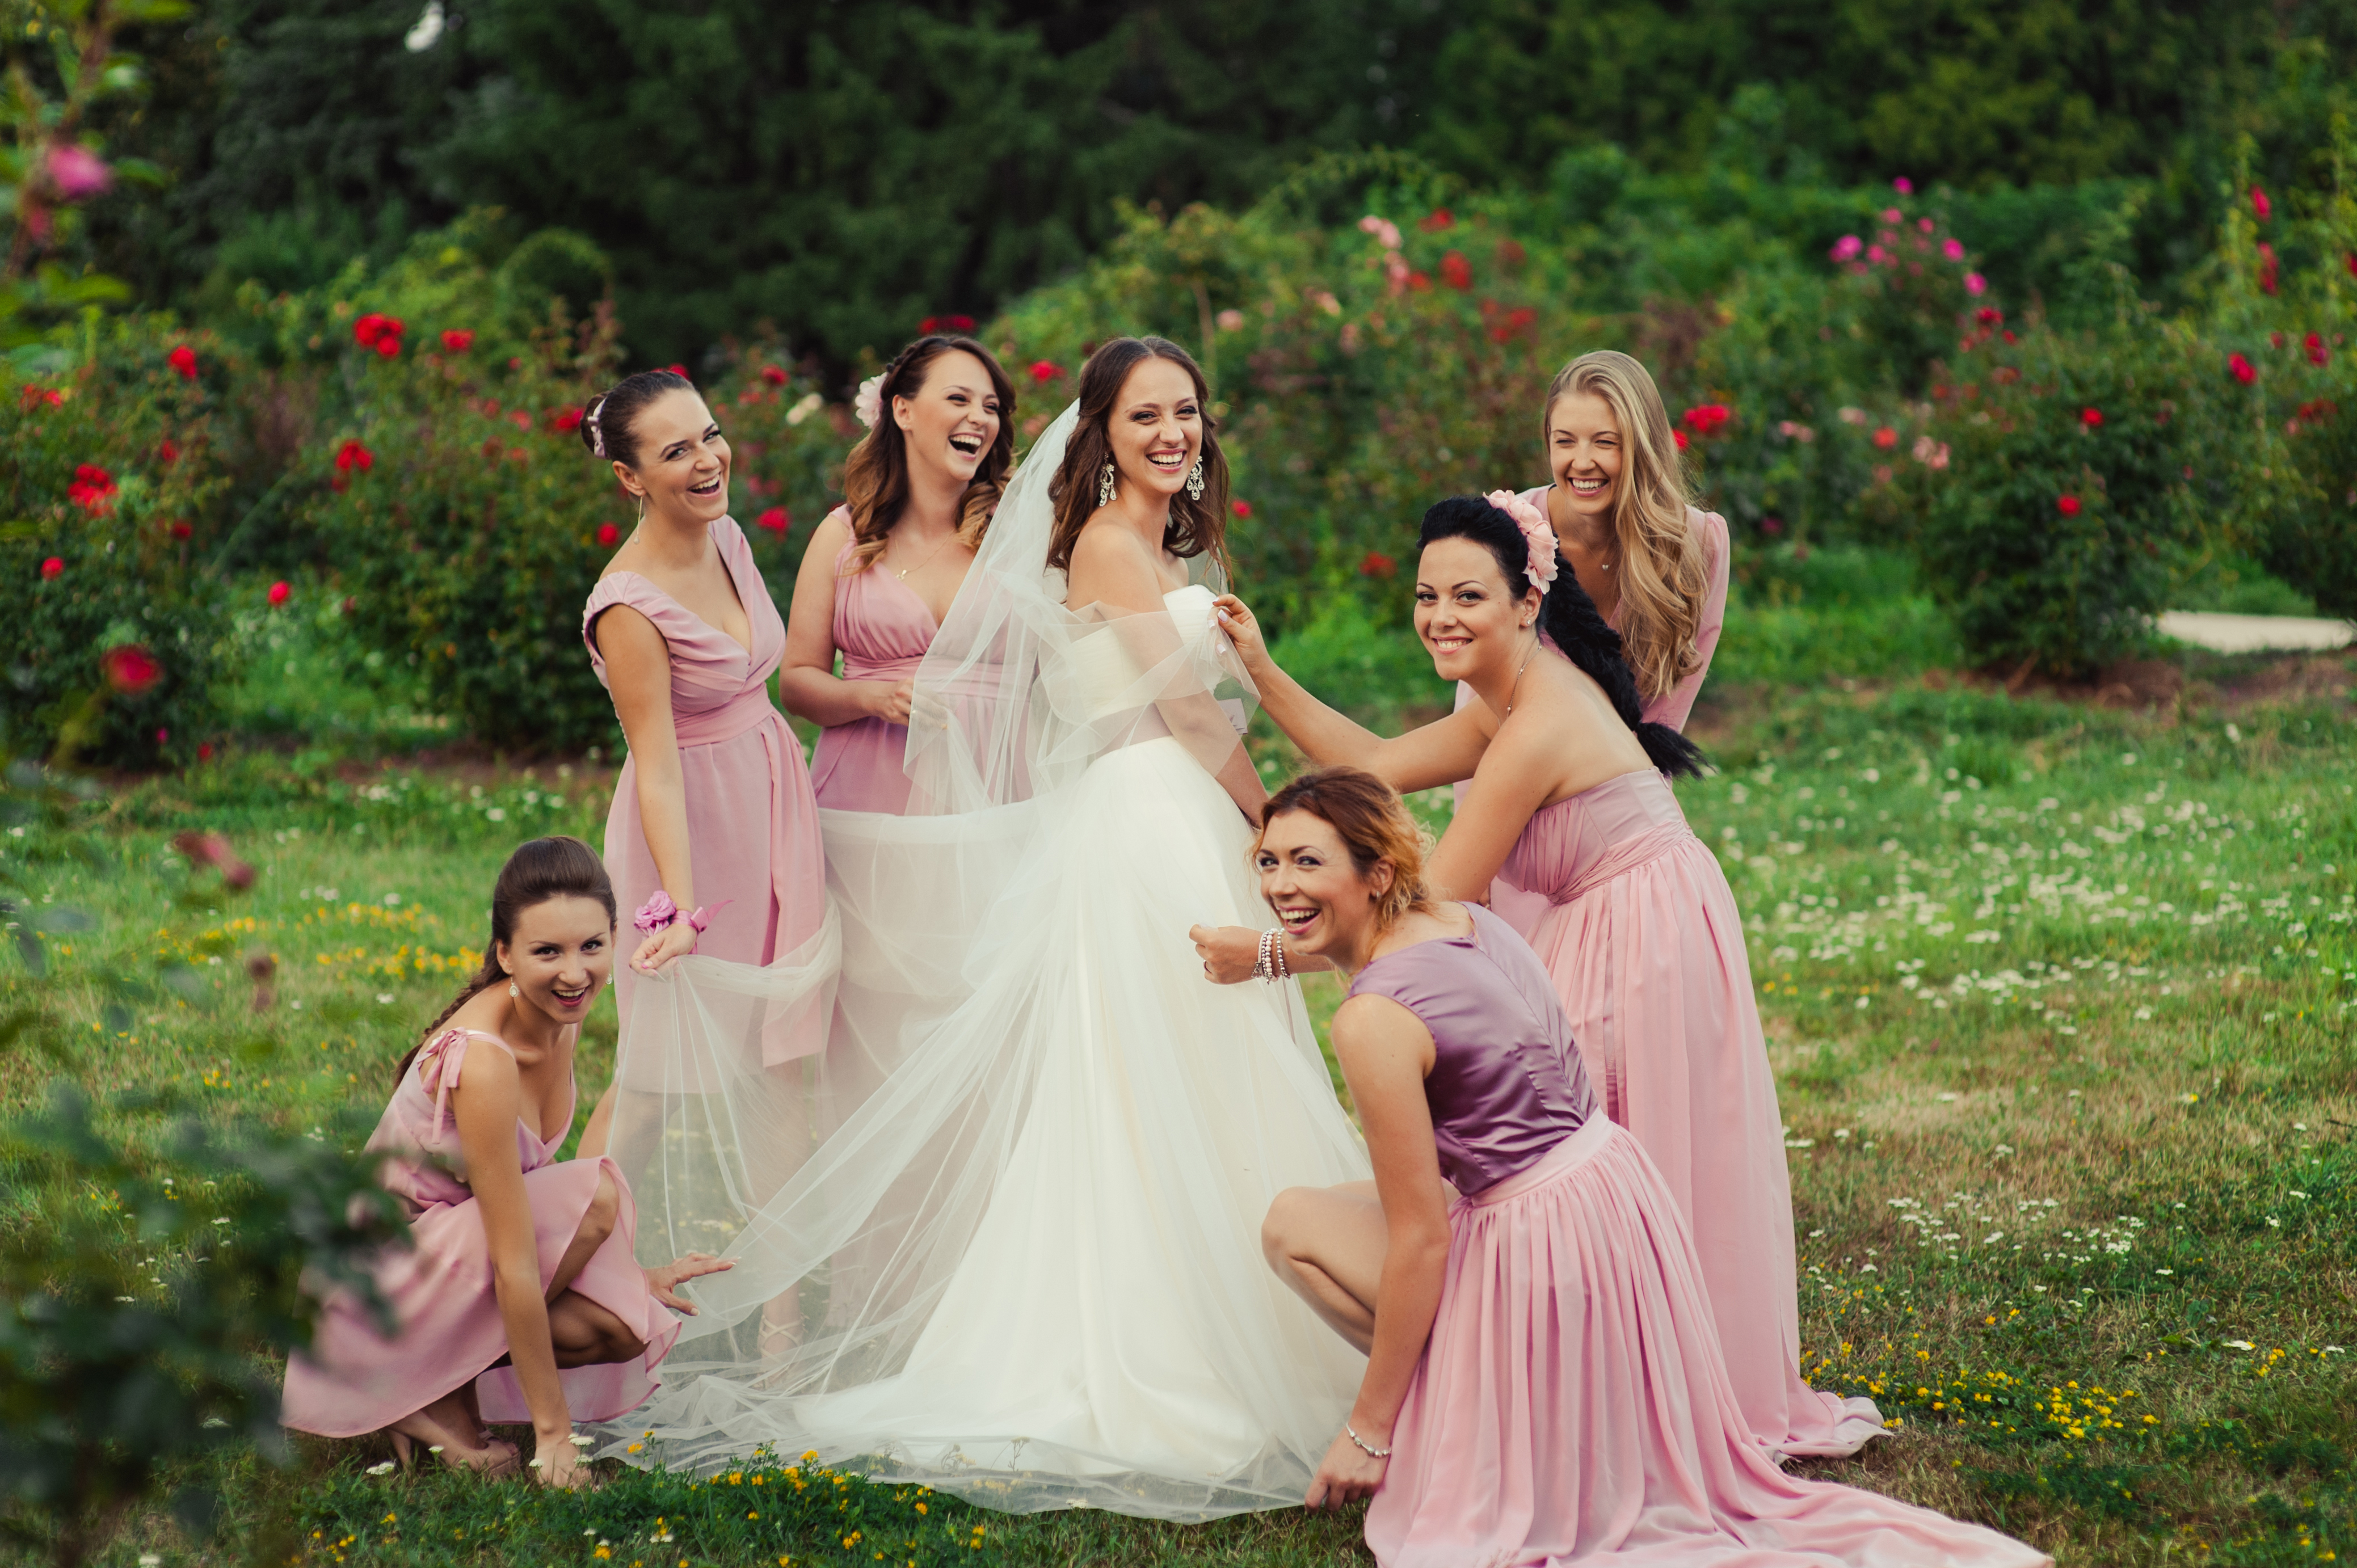 The bridal party. | Source: Shutterstock